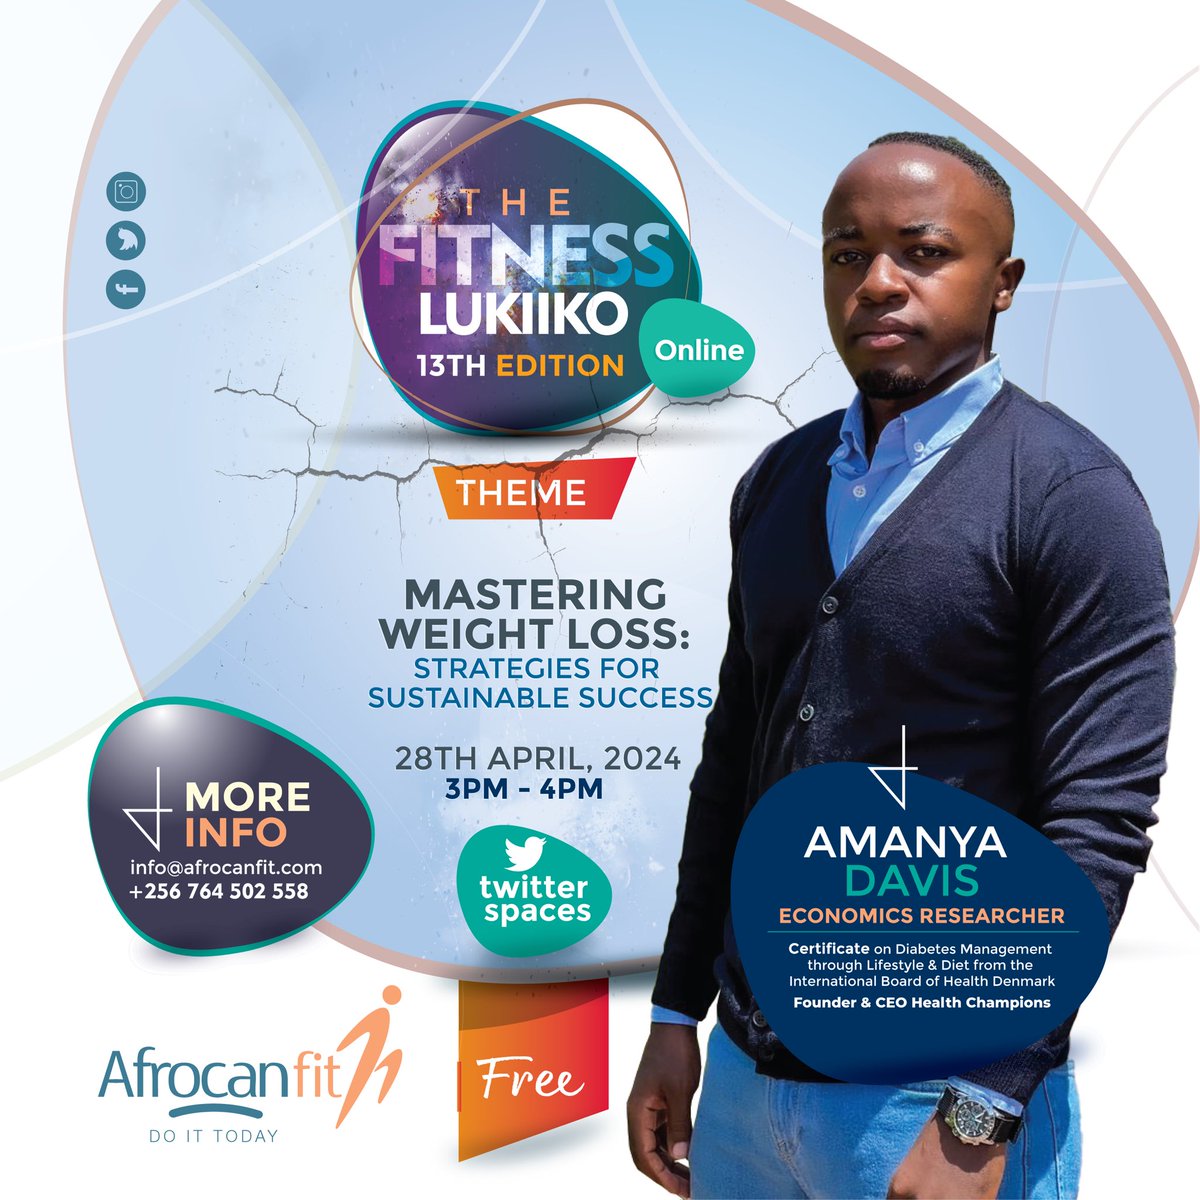 I will be hosted by @afrocanfit for the 13th Edition of the #thefitnesslukiiko I will discuss everything I have applied to master WeightLoss & how it has helped me to become a great student of Health Join us to understand how the Body works & communicates #HealthChampions